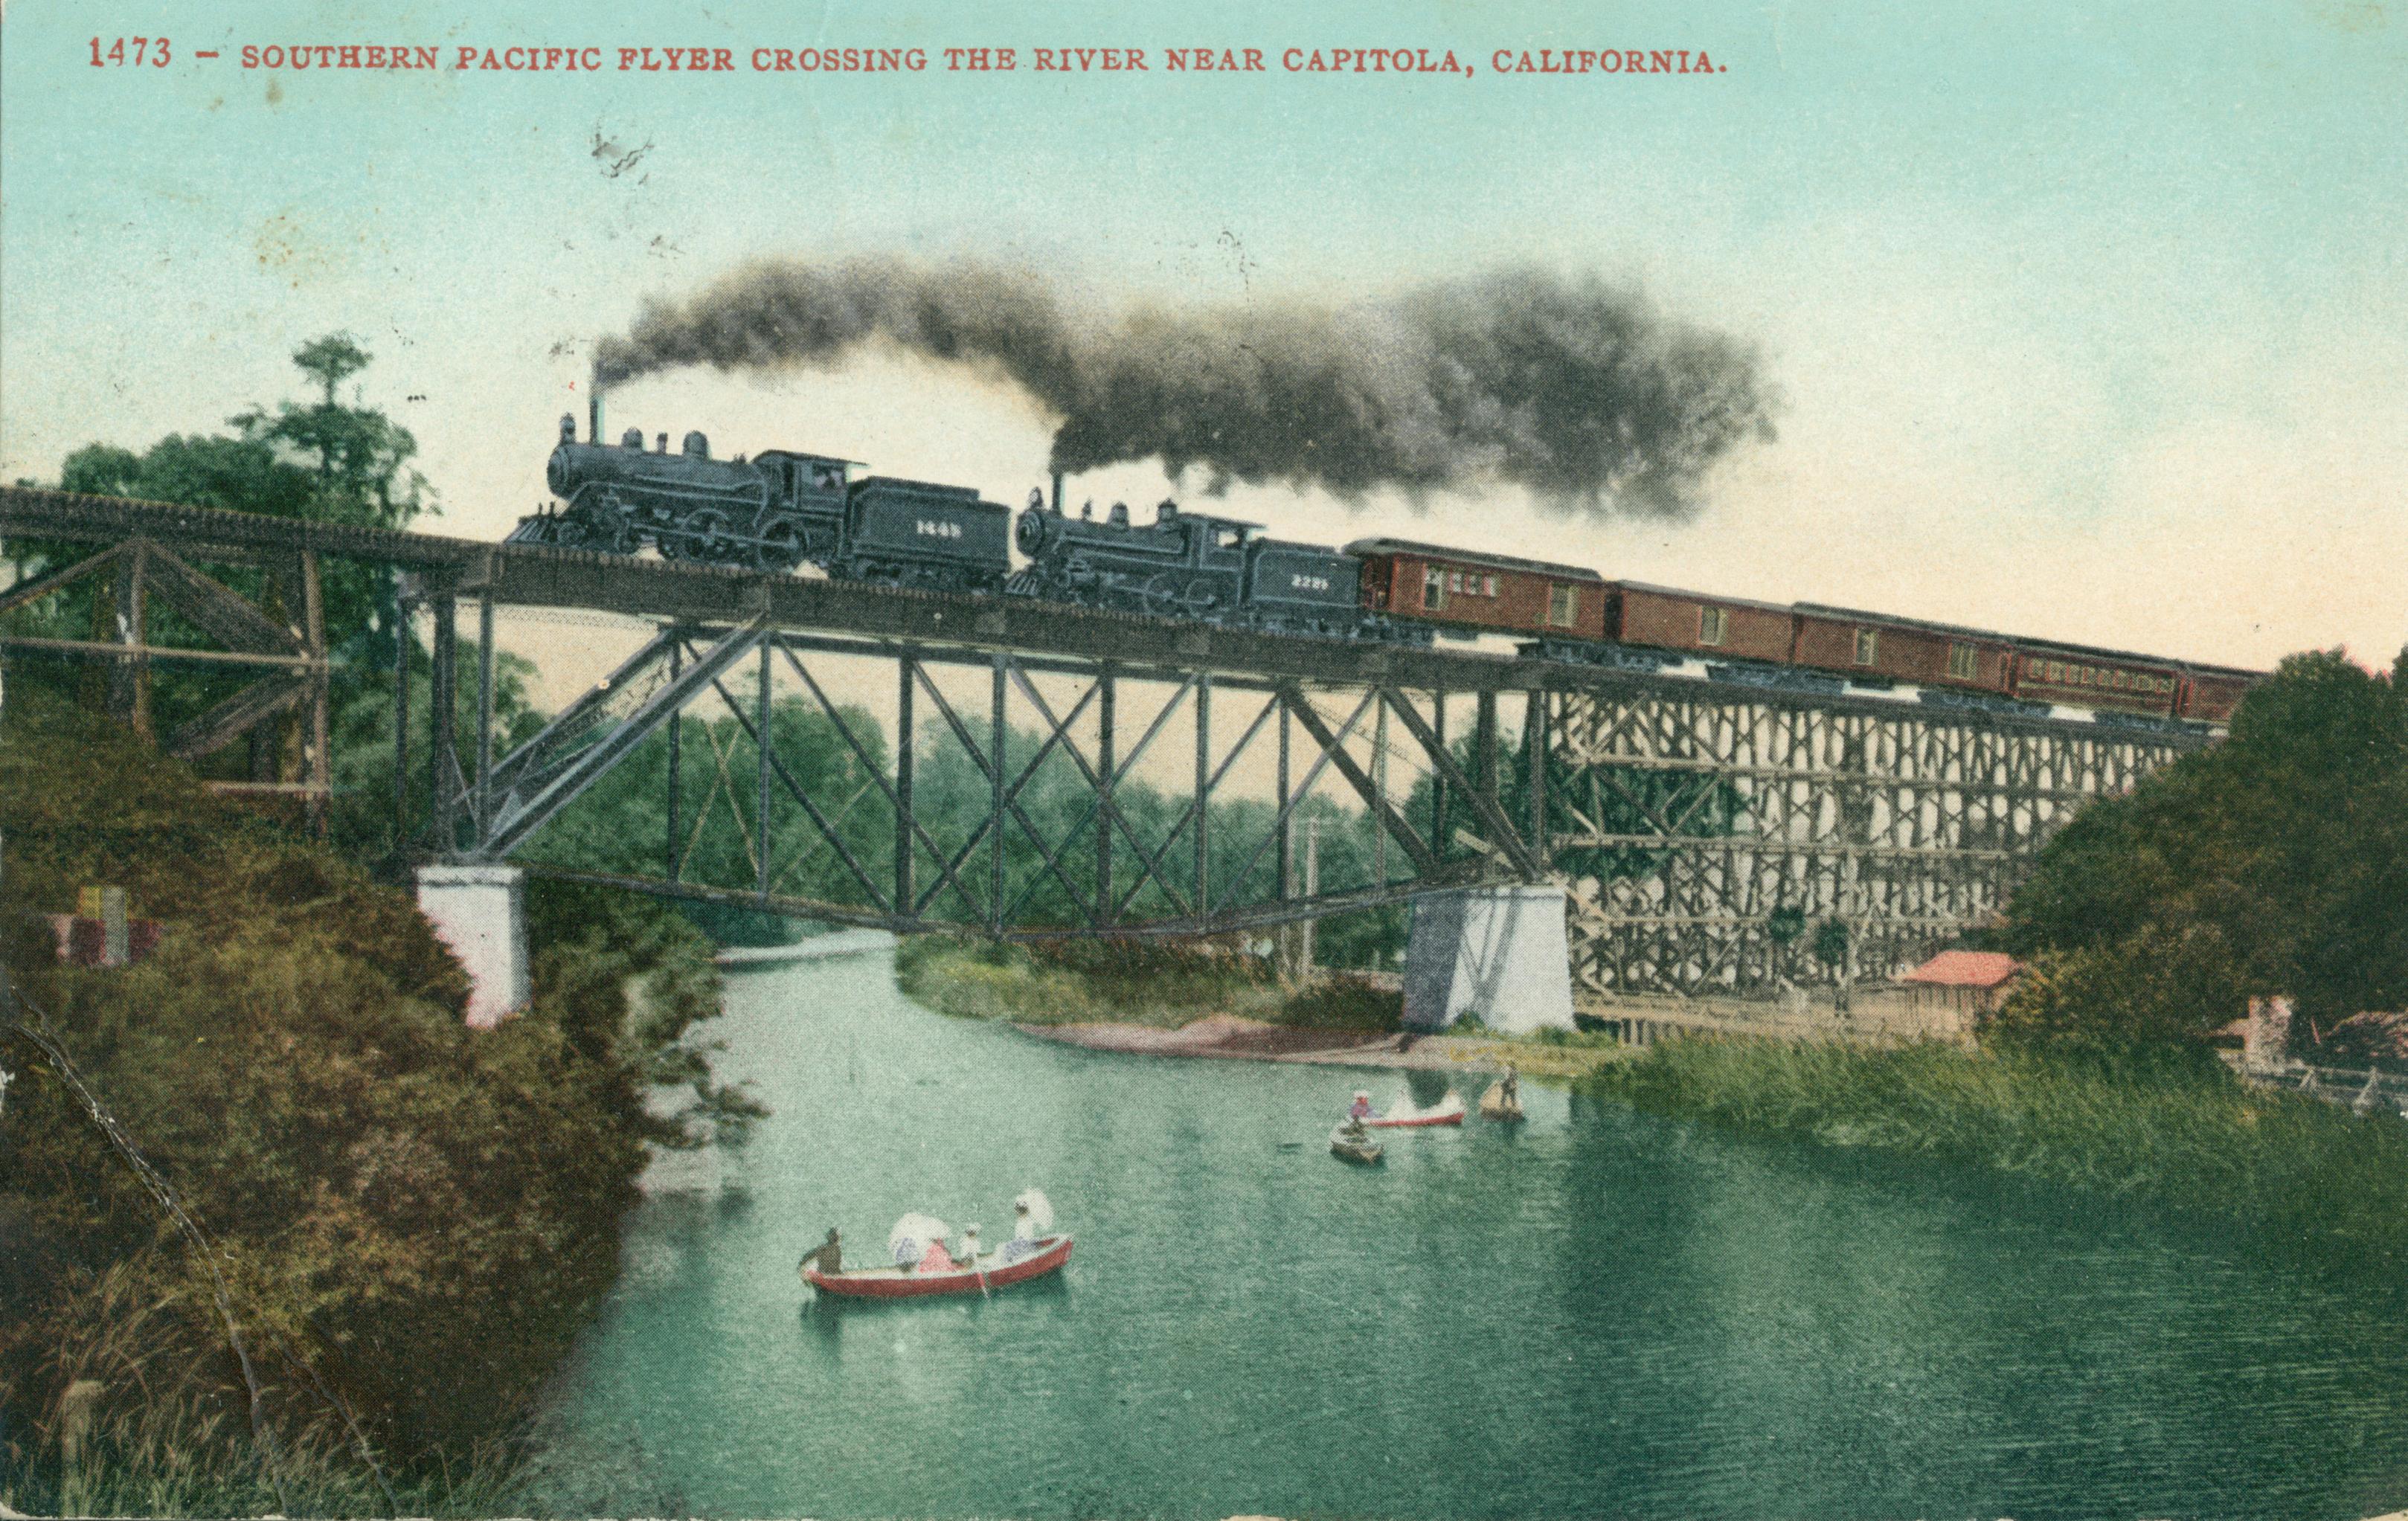 2 steam engines pulling passenger train, traveling along bridge crossing river, two small canoe-like boats in river with ladies holding parasols